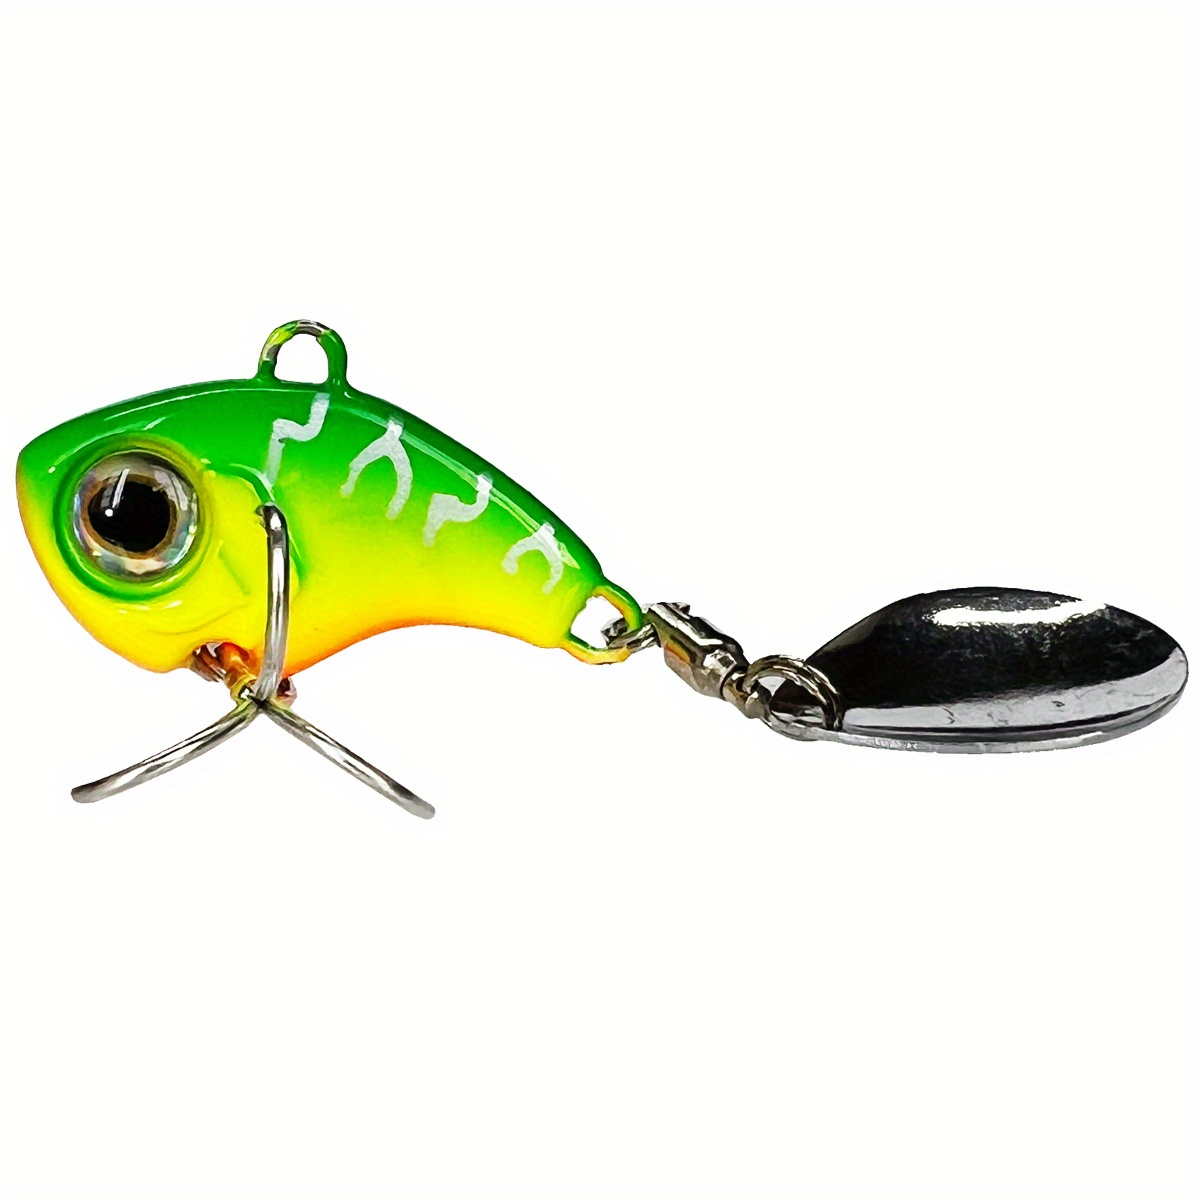 Mixed Spoon VIB Fishing Bait Set With Soft Bads, Frog Minnow, Karl Popper  Angular Hooks Ideal For Freshwater Fishing B225 230517 From Ning07, $13.52